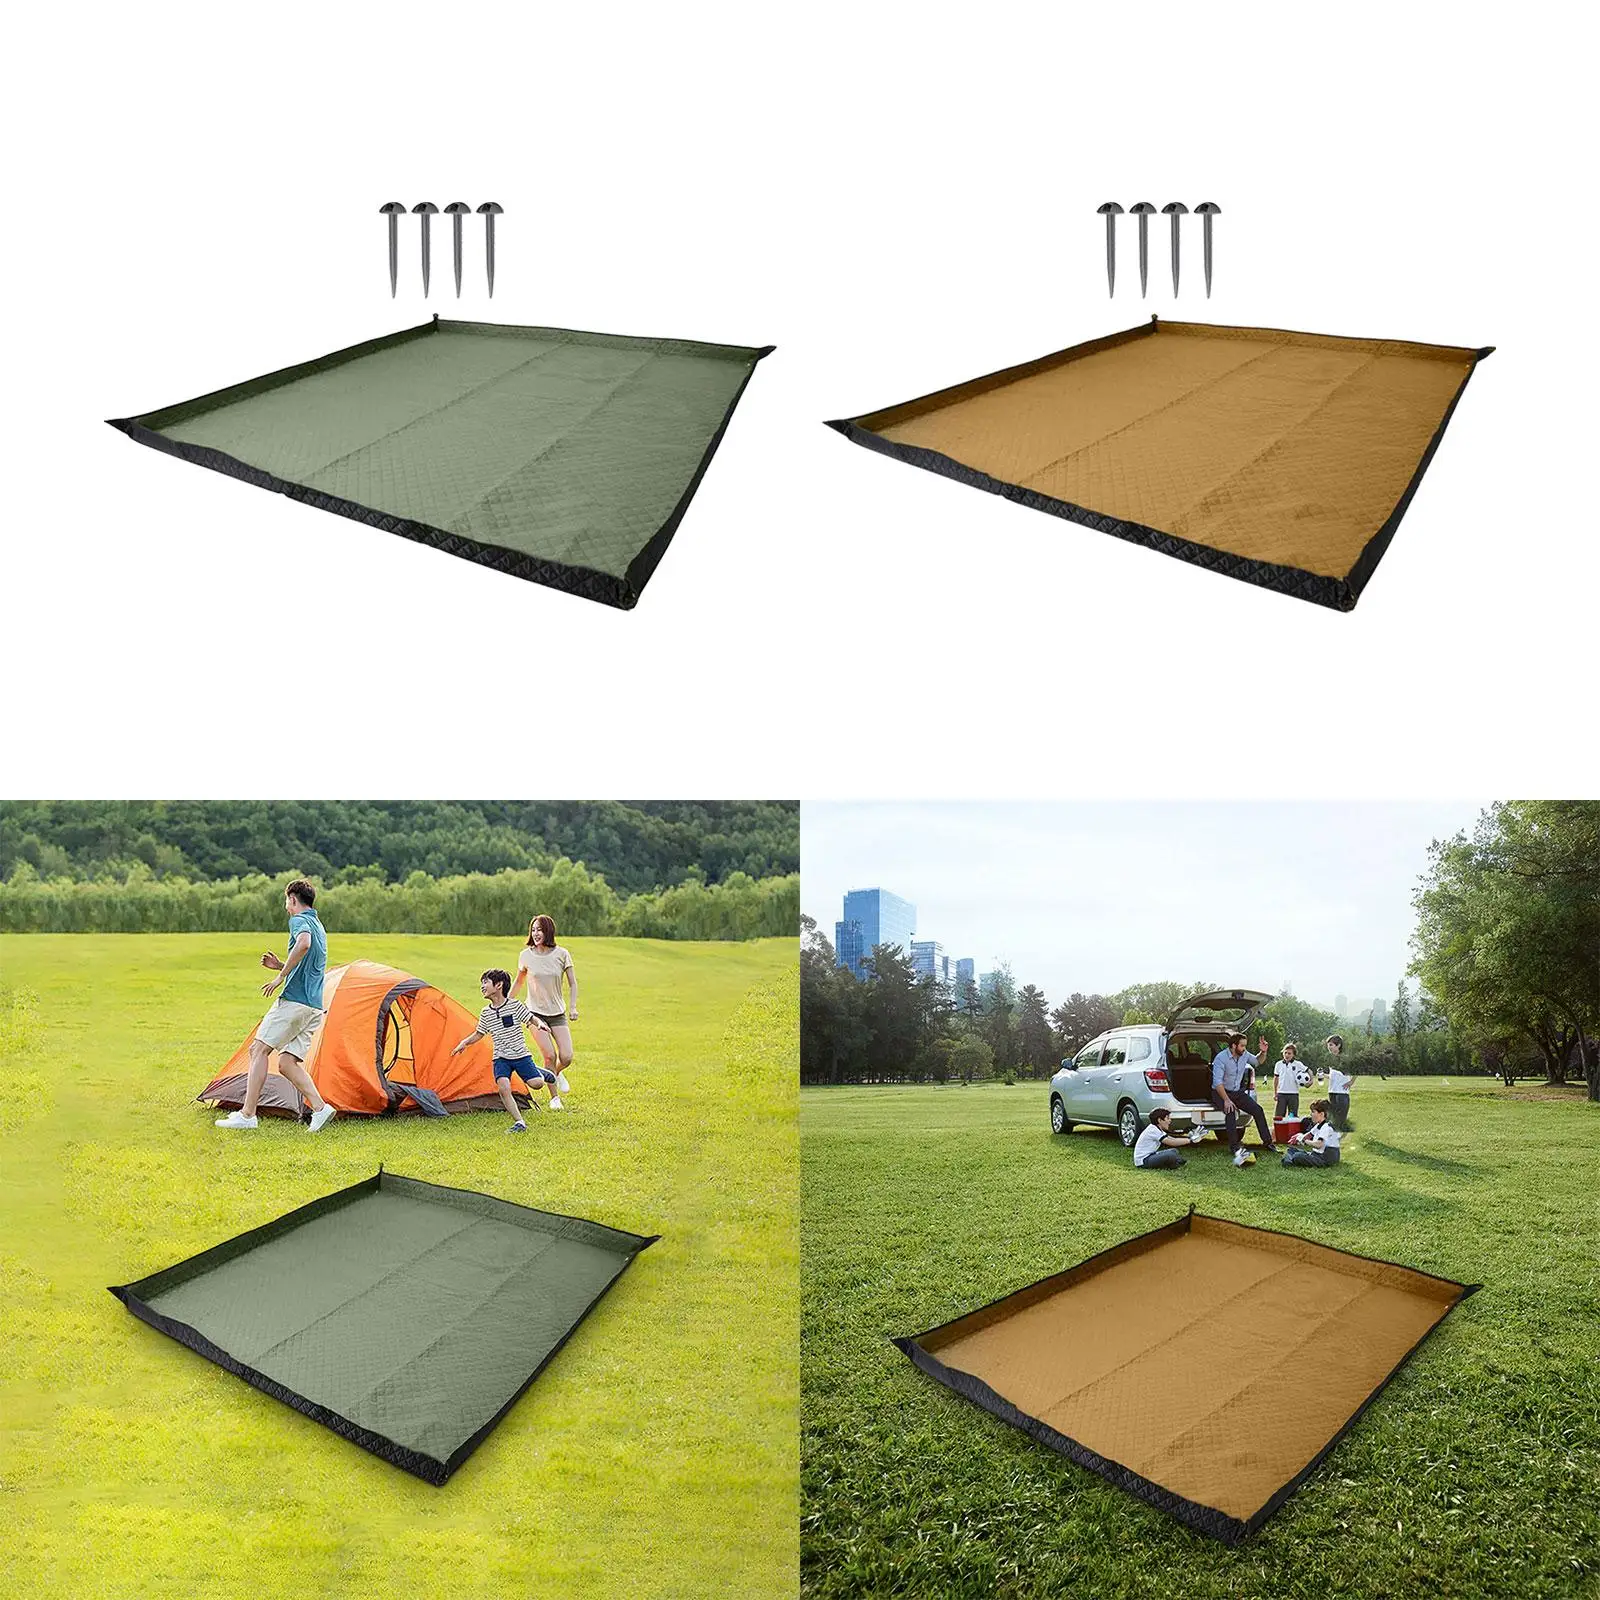 Picnic Blanket Sleeping Pad with 4 Nails with Carry Strap 78.7